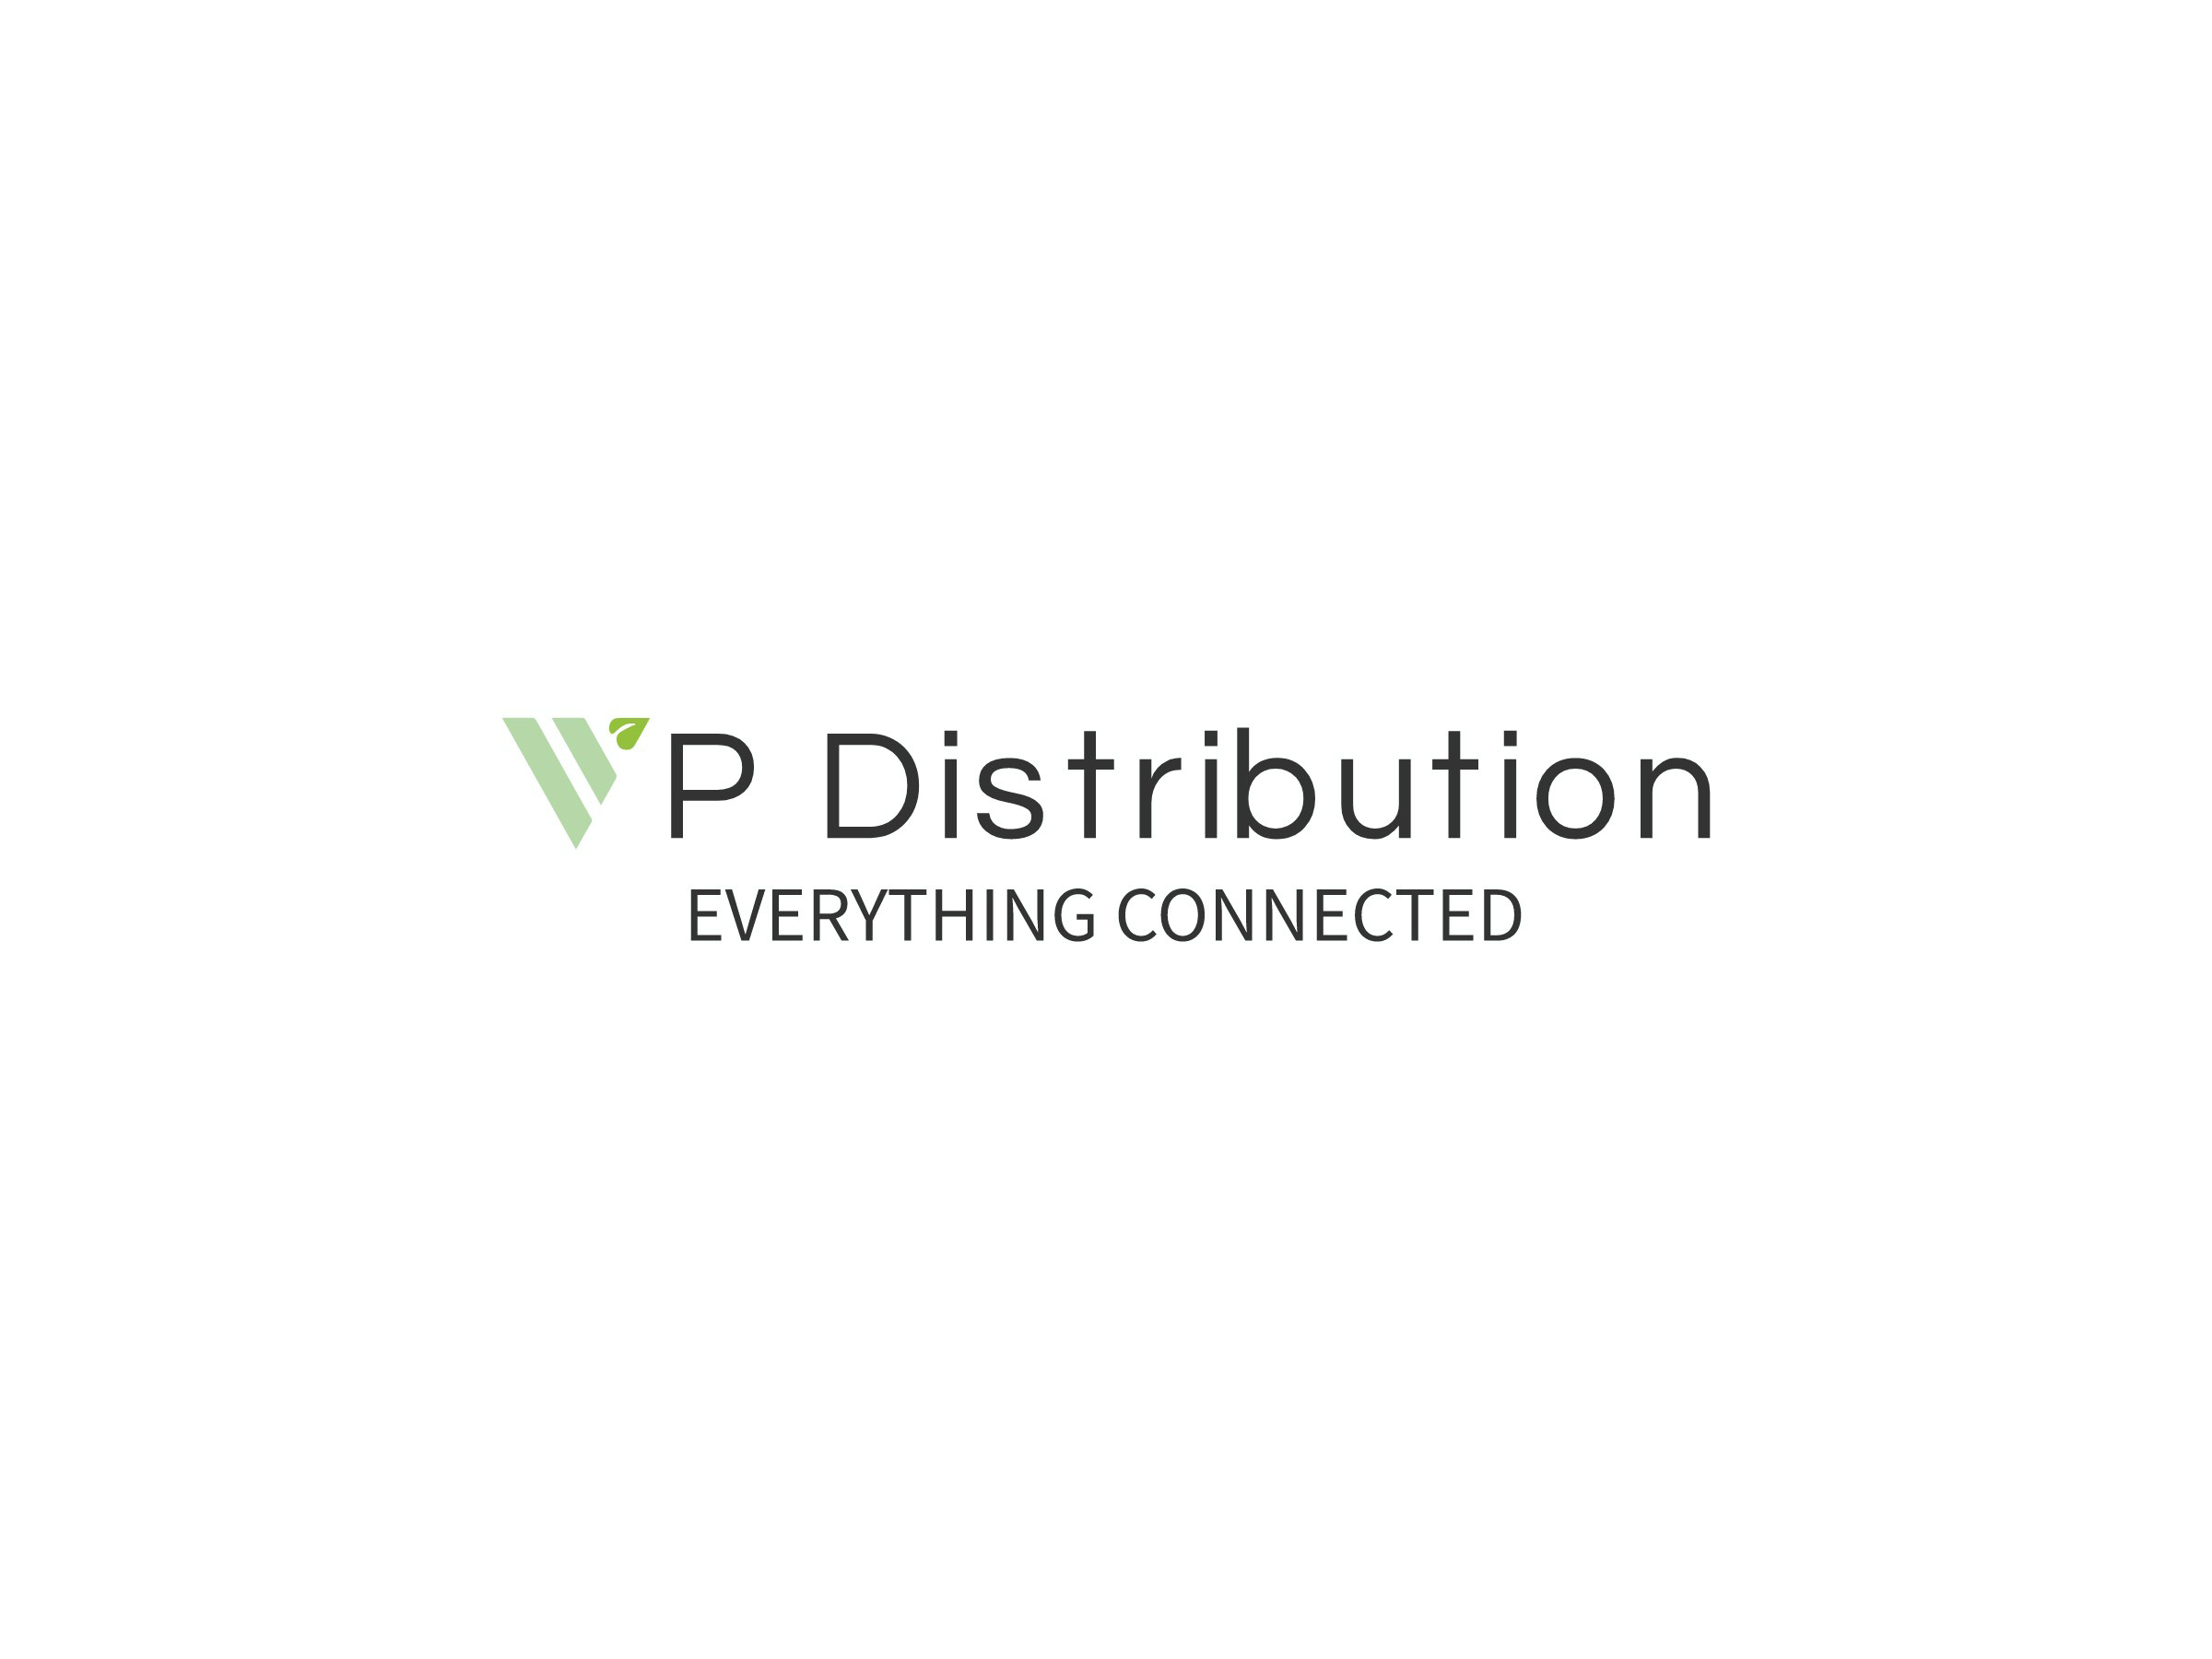 Featured image for “V P Distribution”